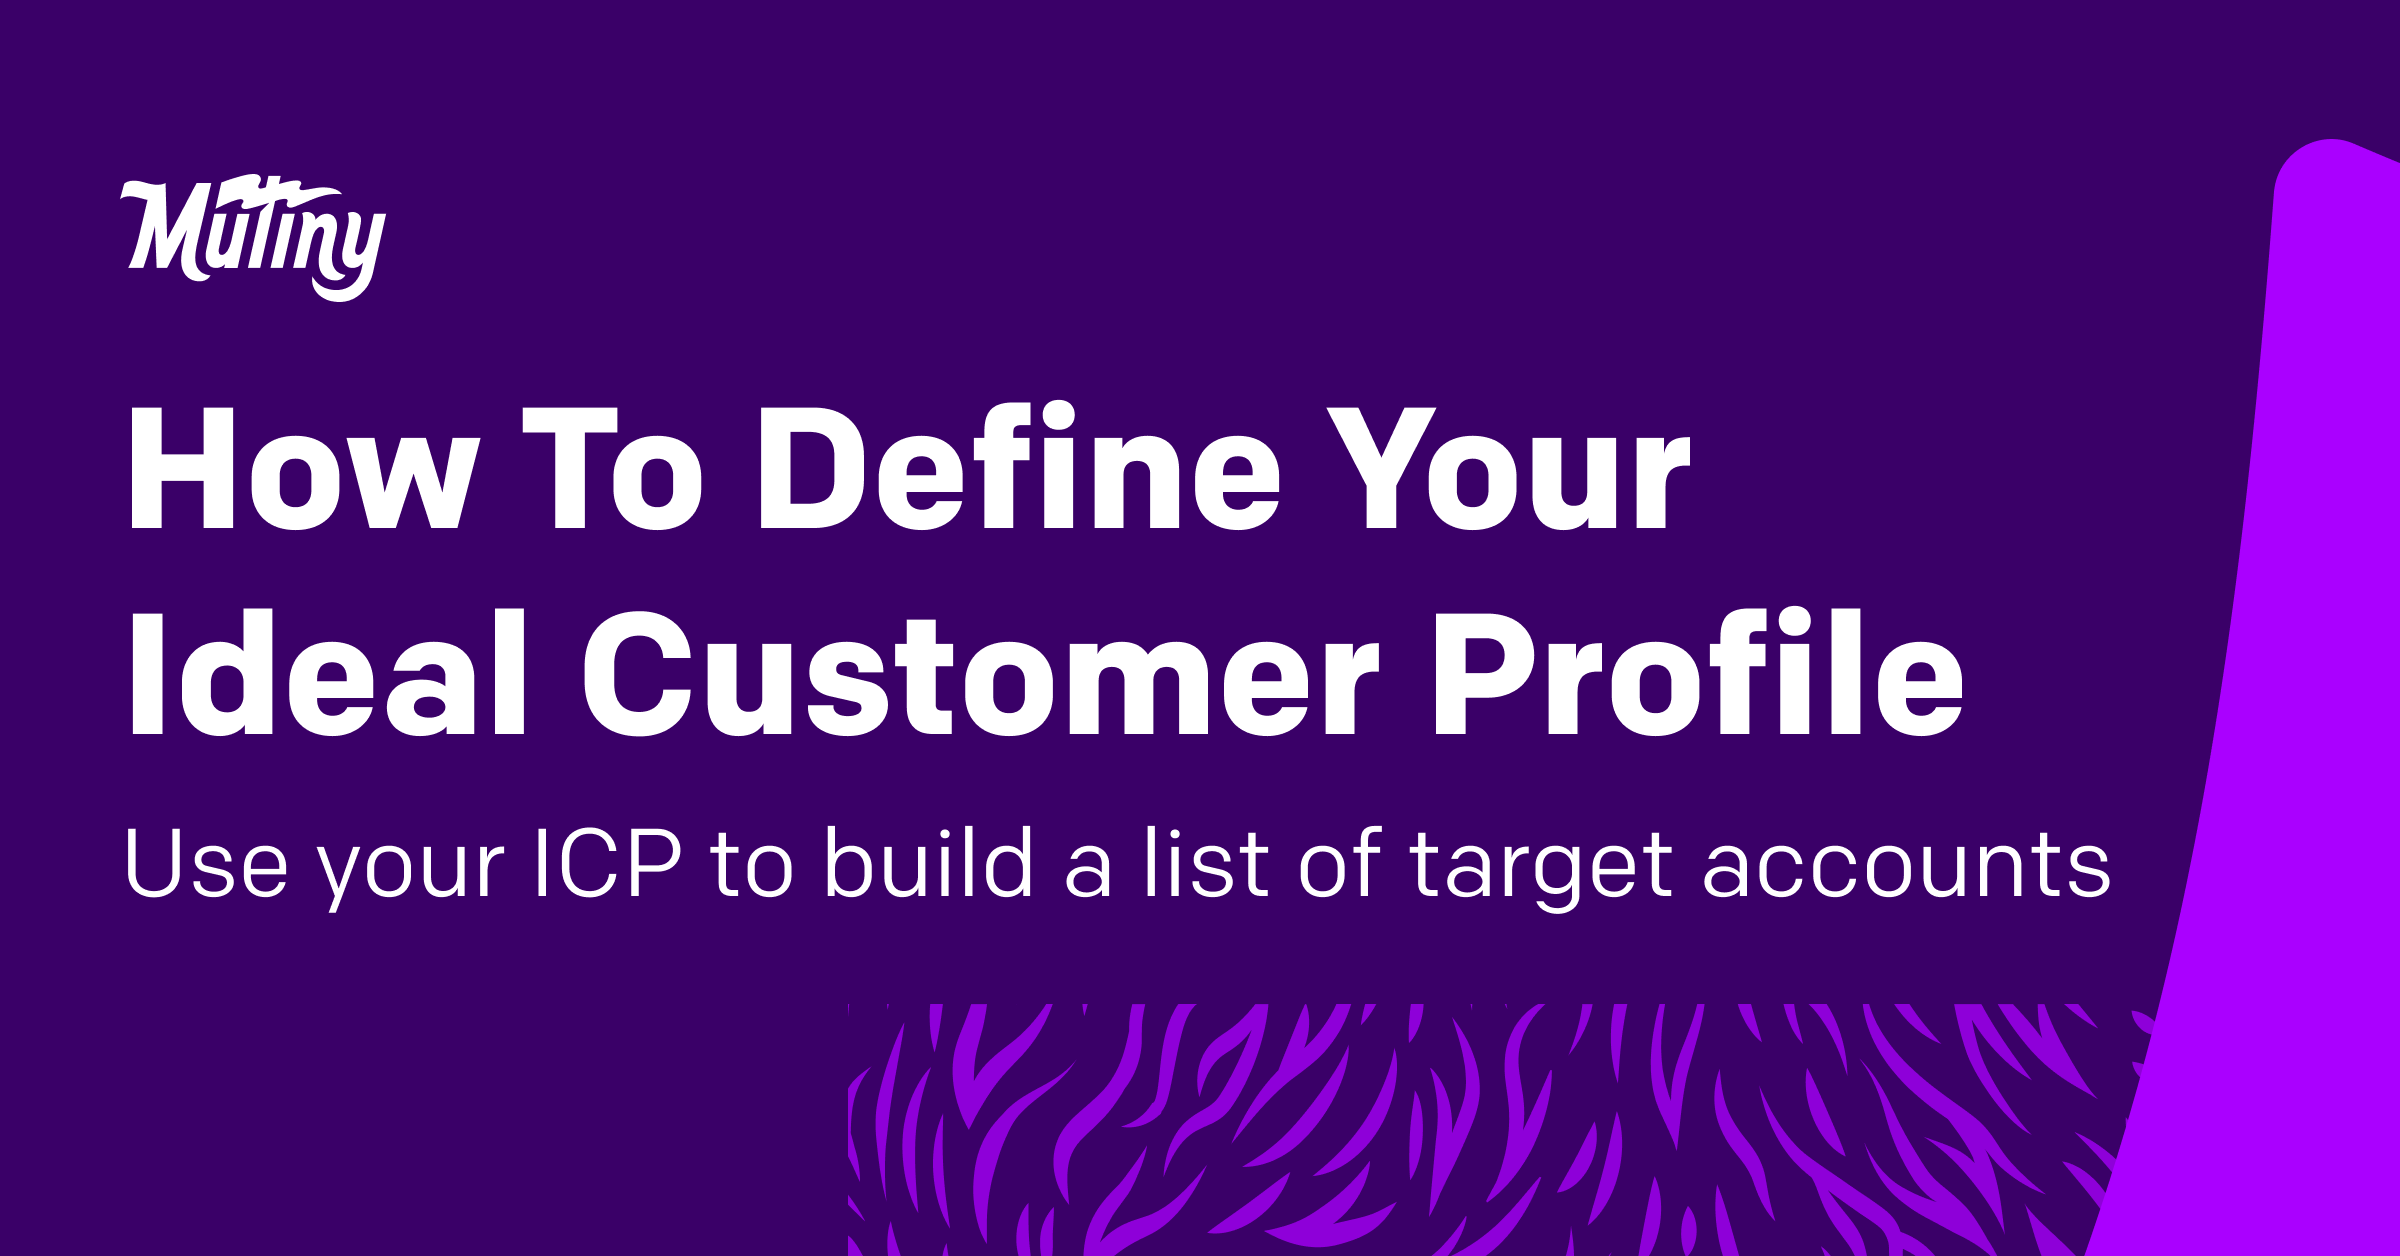 How To Define Your Ideal Customer Profile For A Target Account List